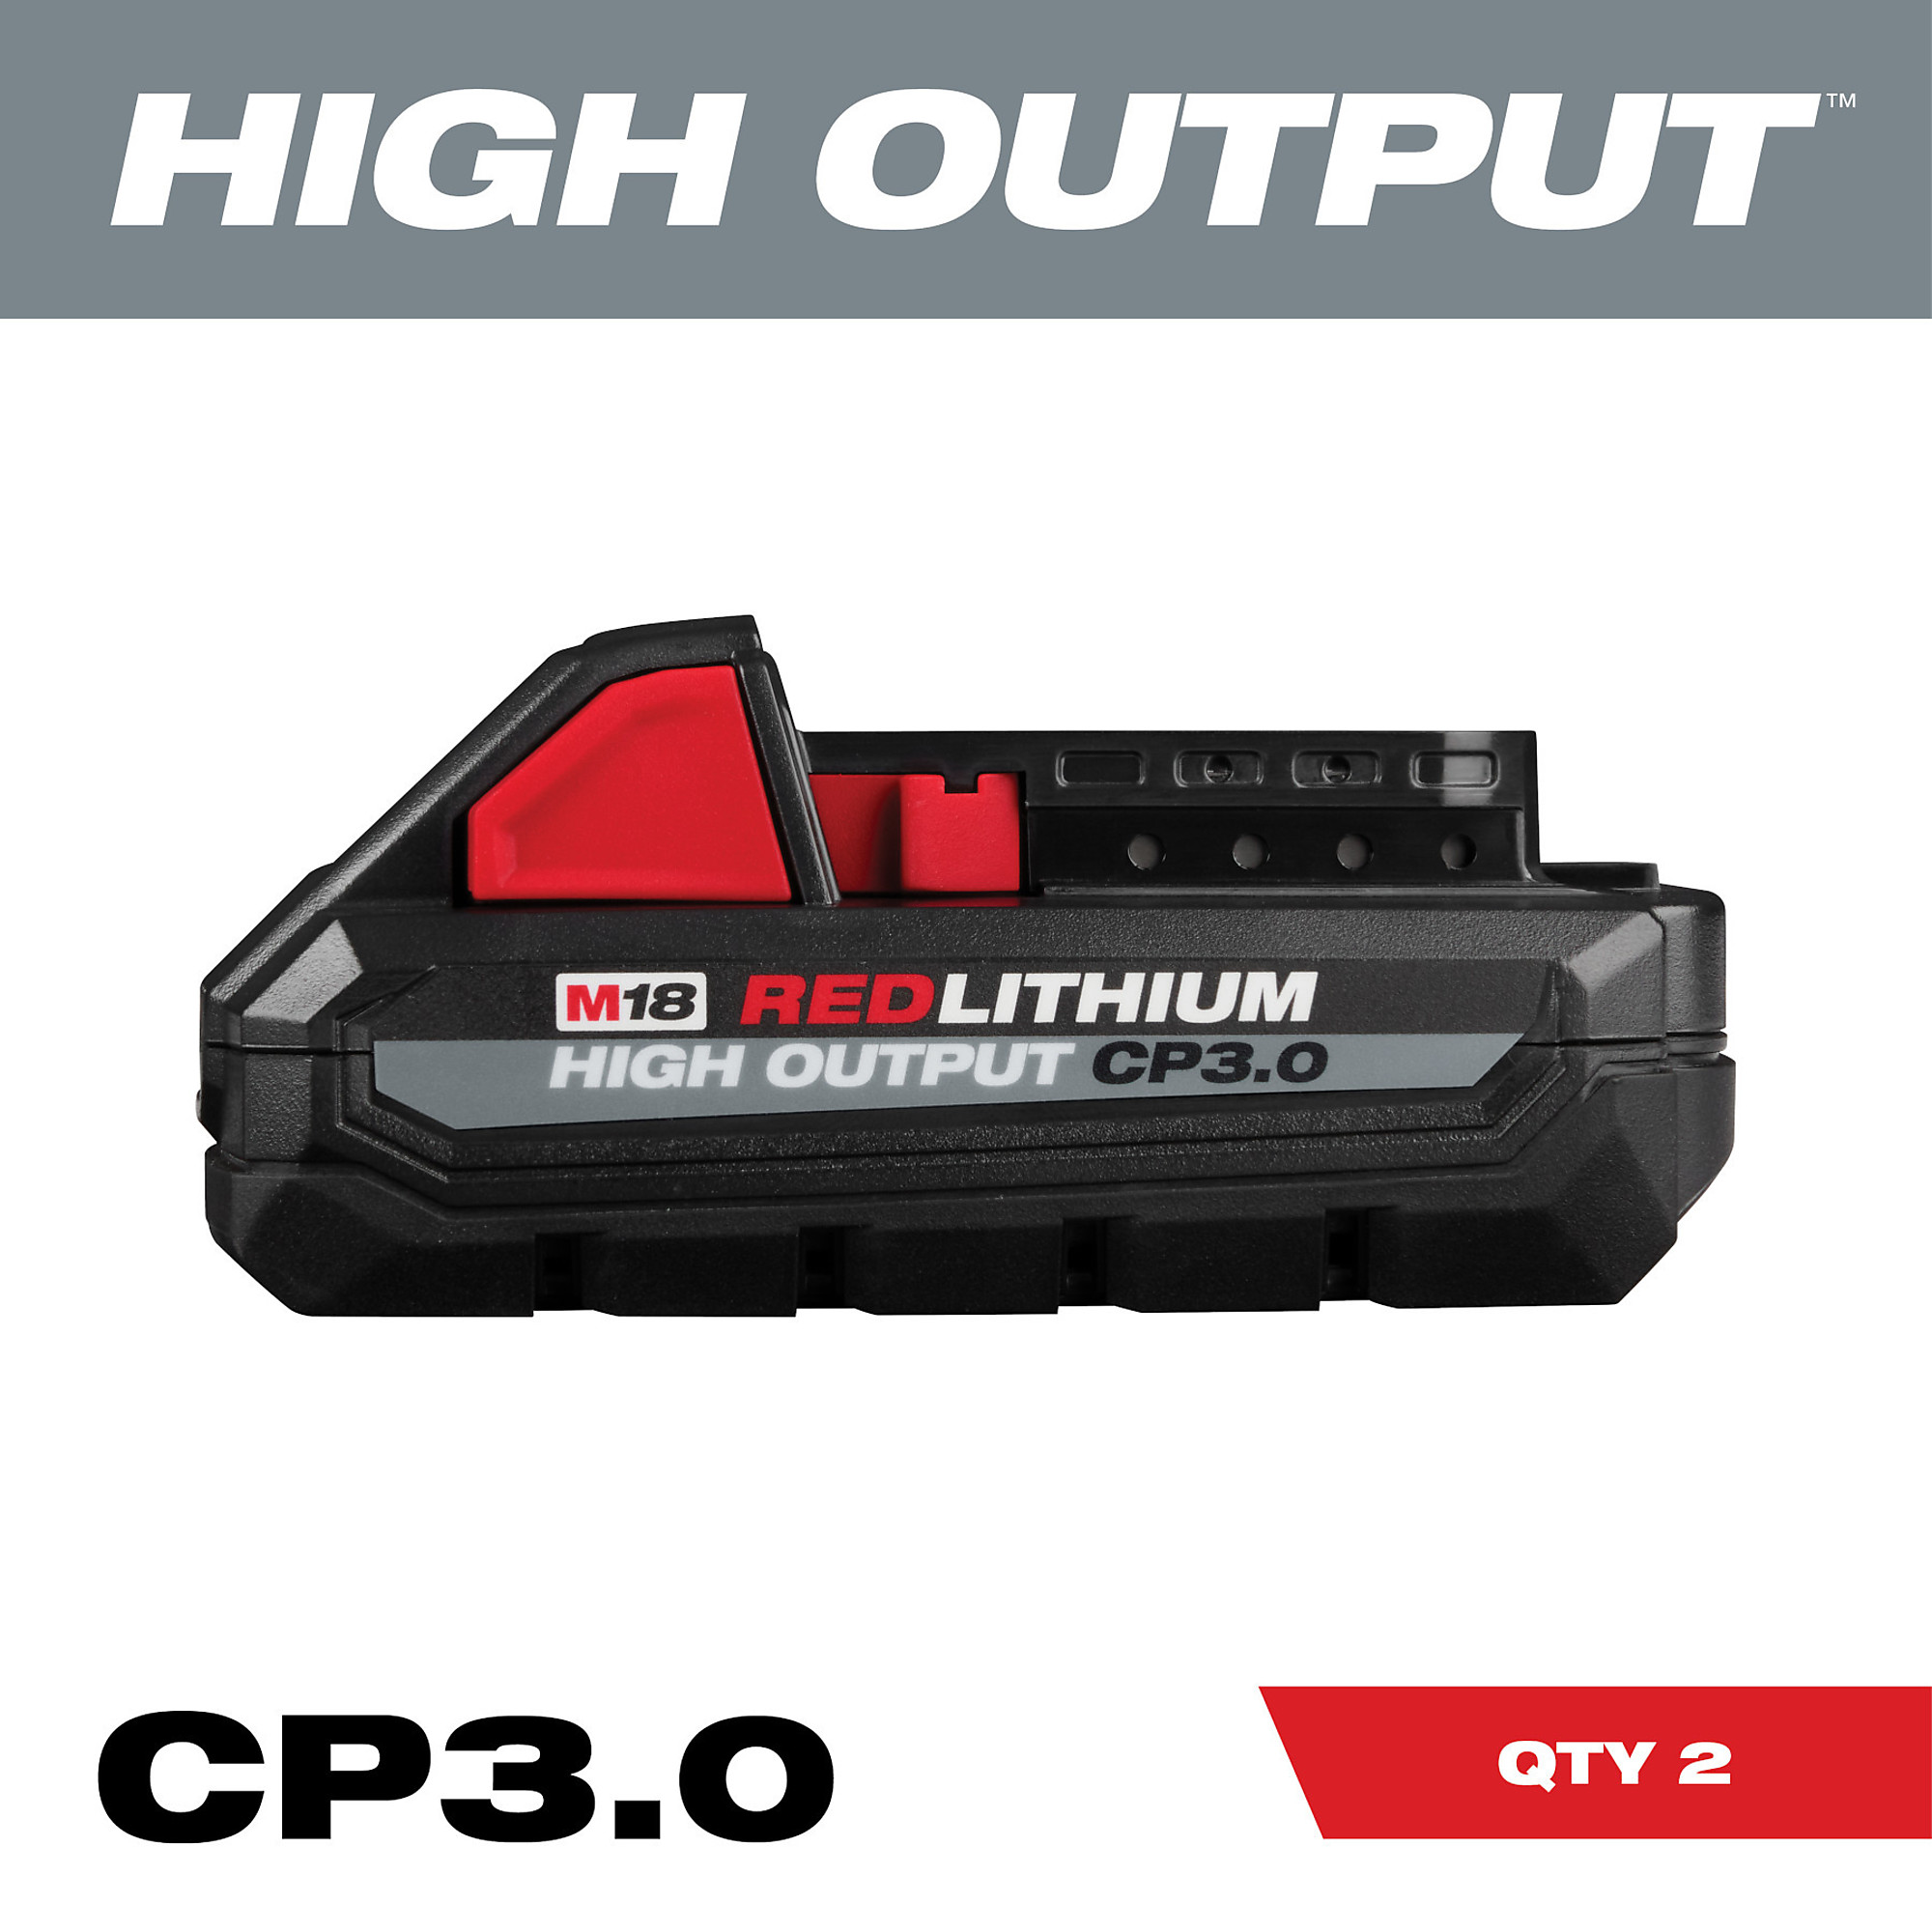 M18 REDLITHIUM High Output CP3.0 Battery Pack — 2-Pack, Model - Milwaukee 48-11-1837